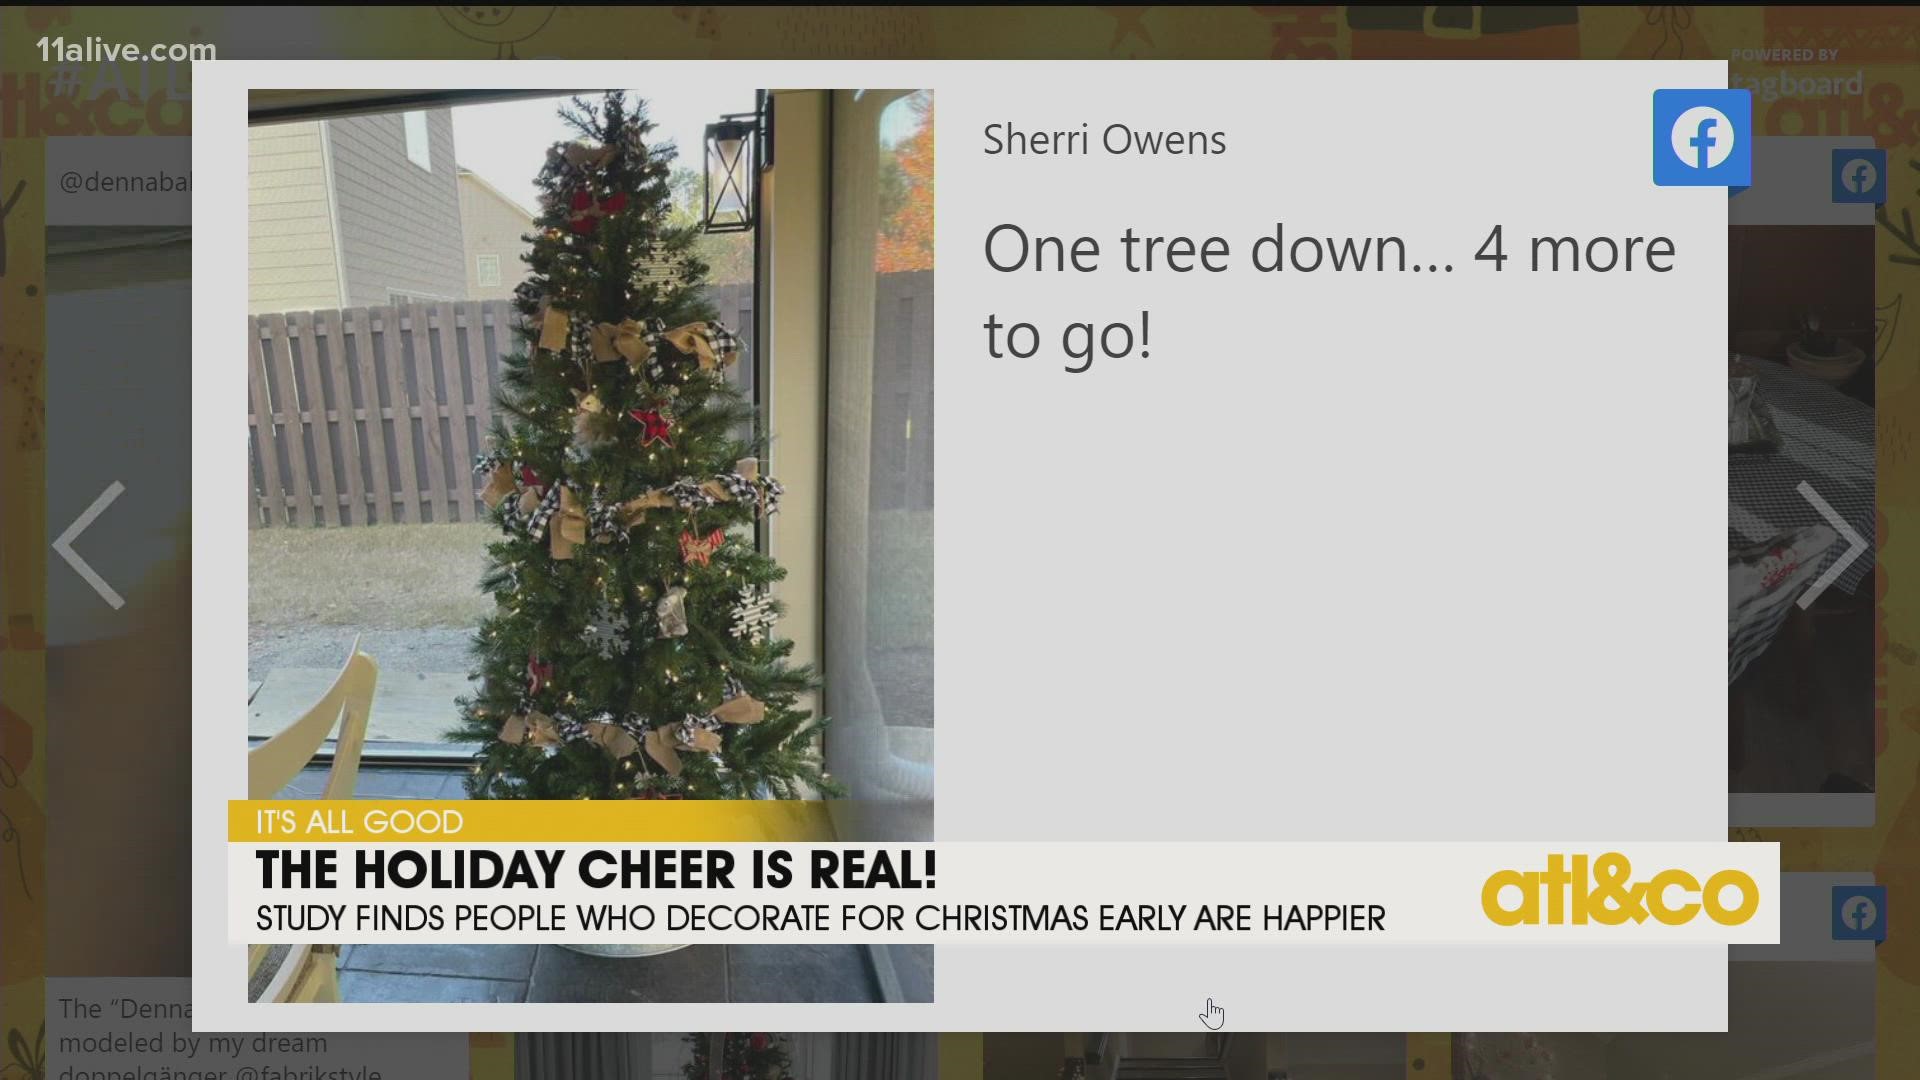 People Who Decorate Earlier for Christmas are Happier | 11alive.com